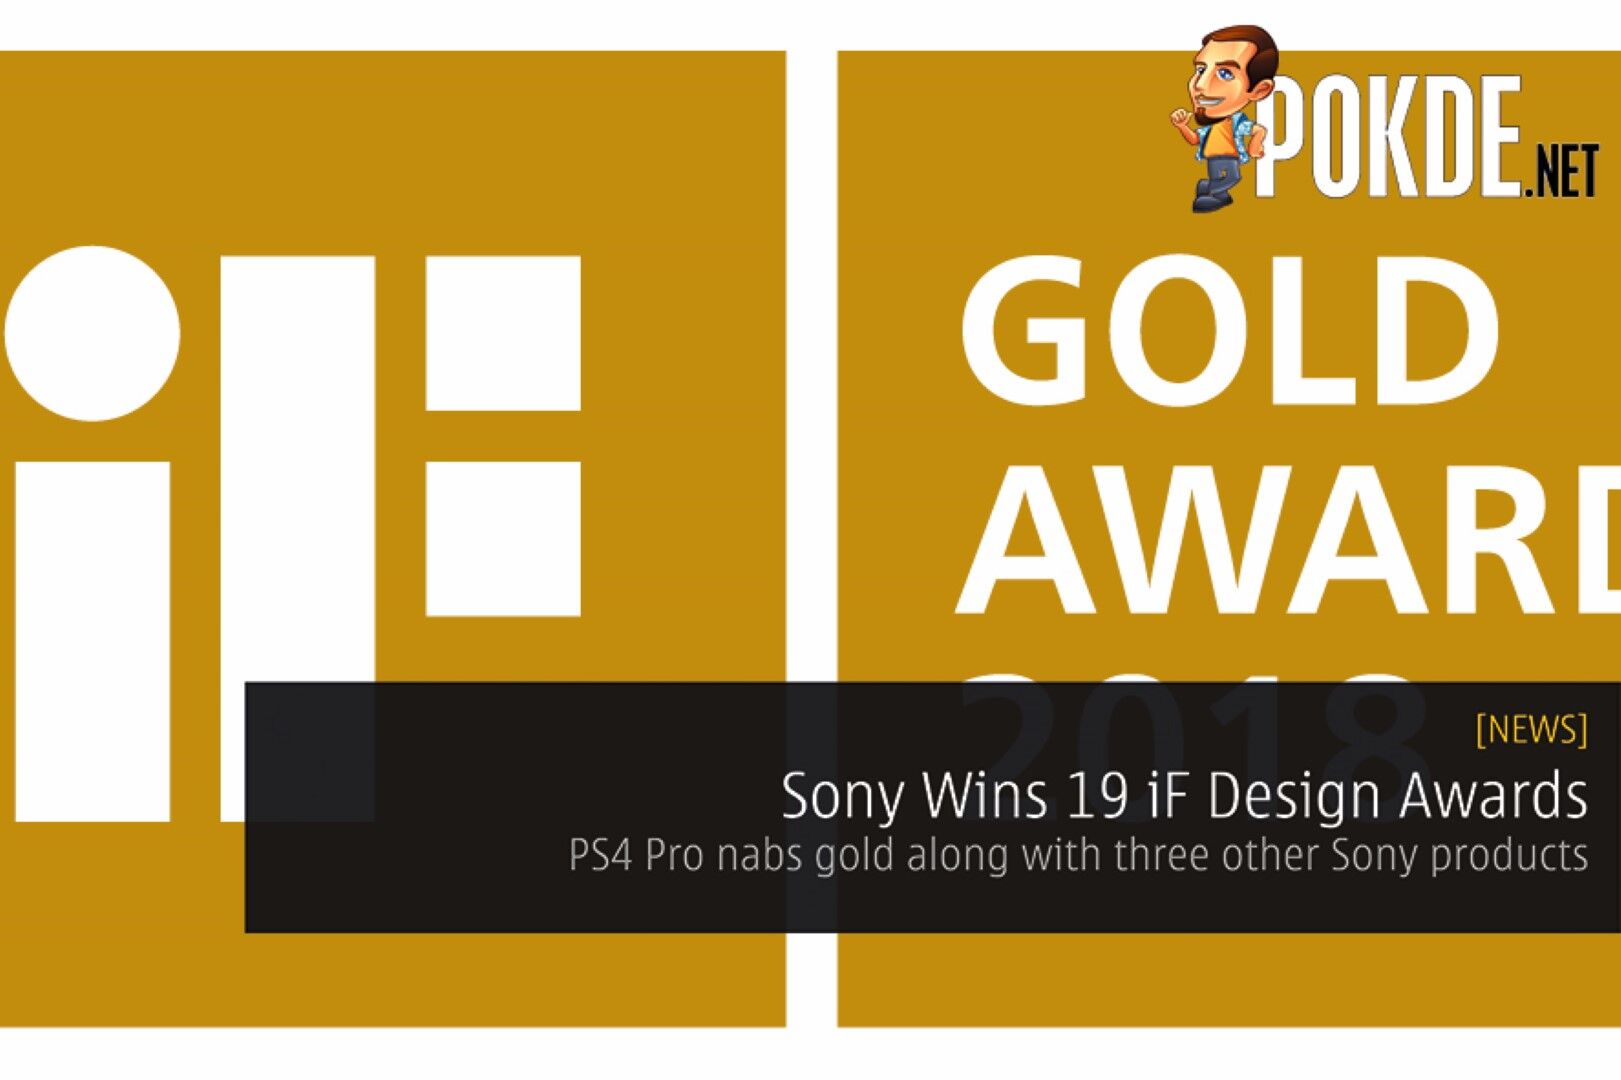 Sony Wins 19 iF Design Awards - PlayStation 4 Pro nabs gold along with three other Sony products 20